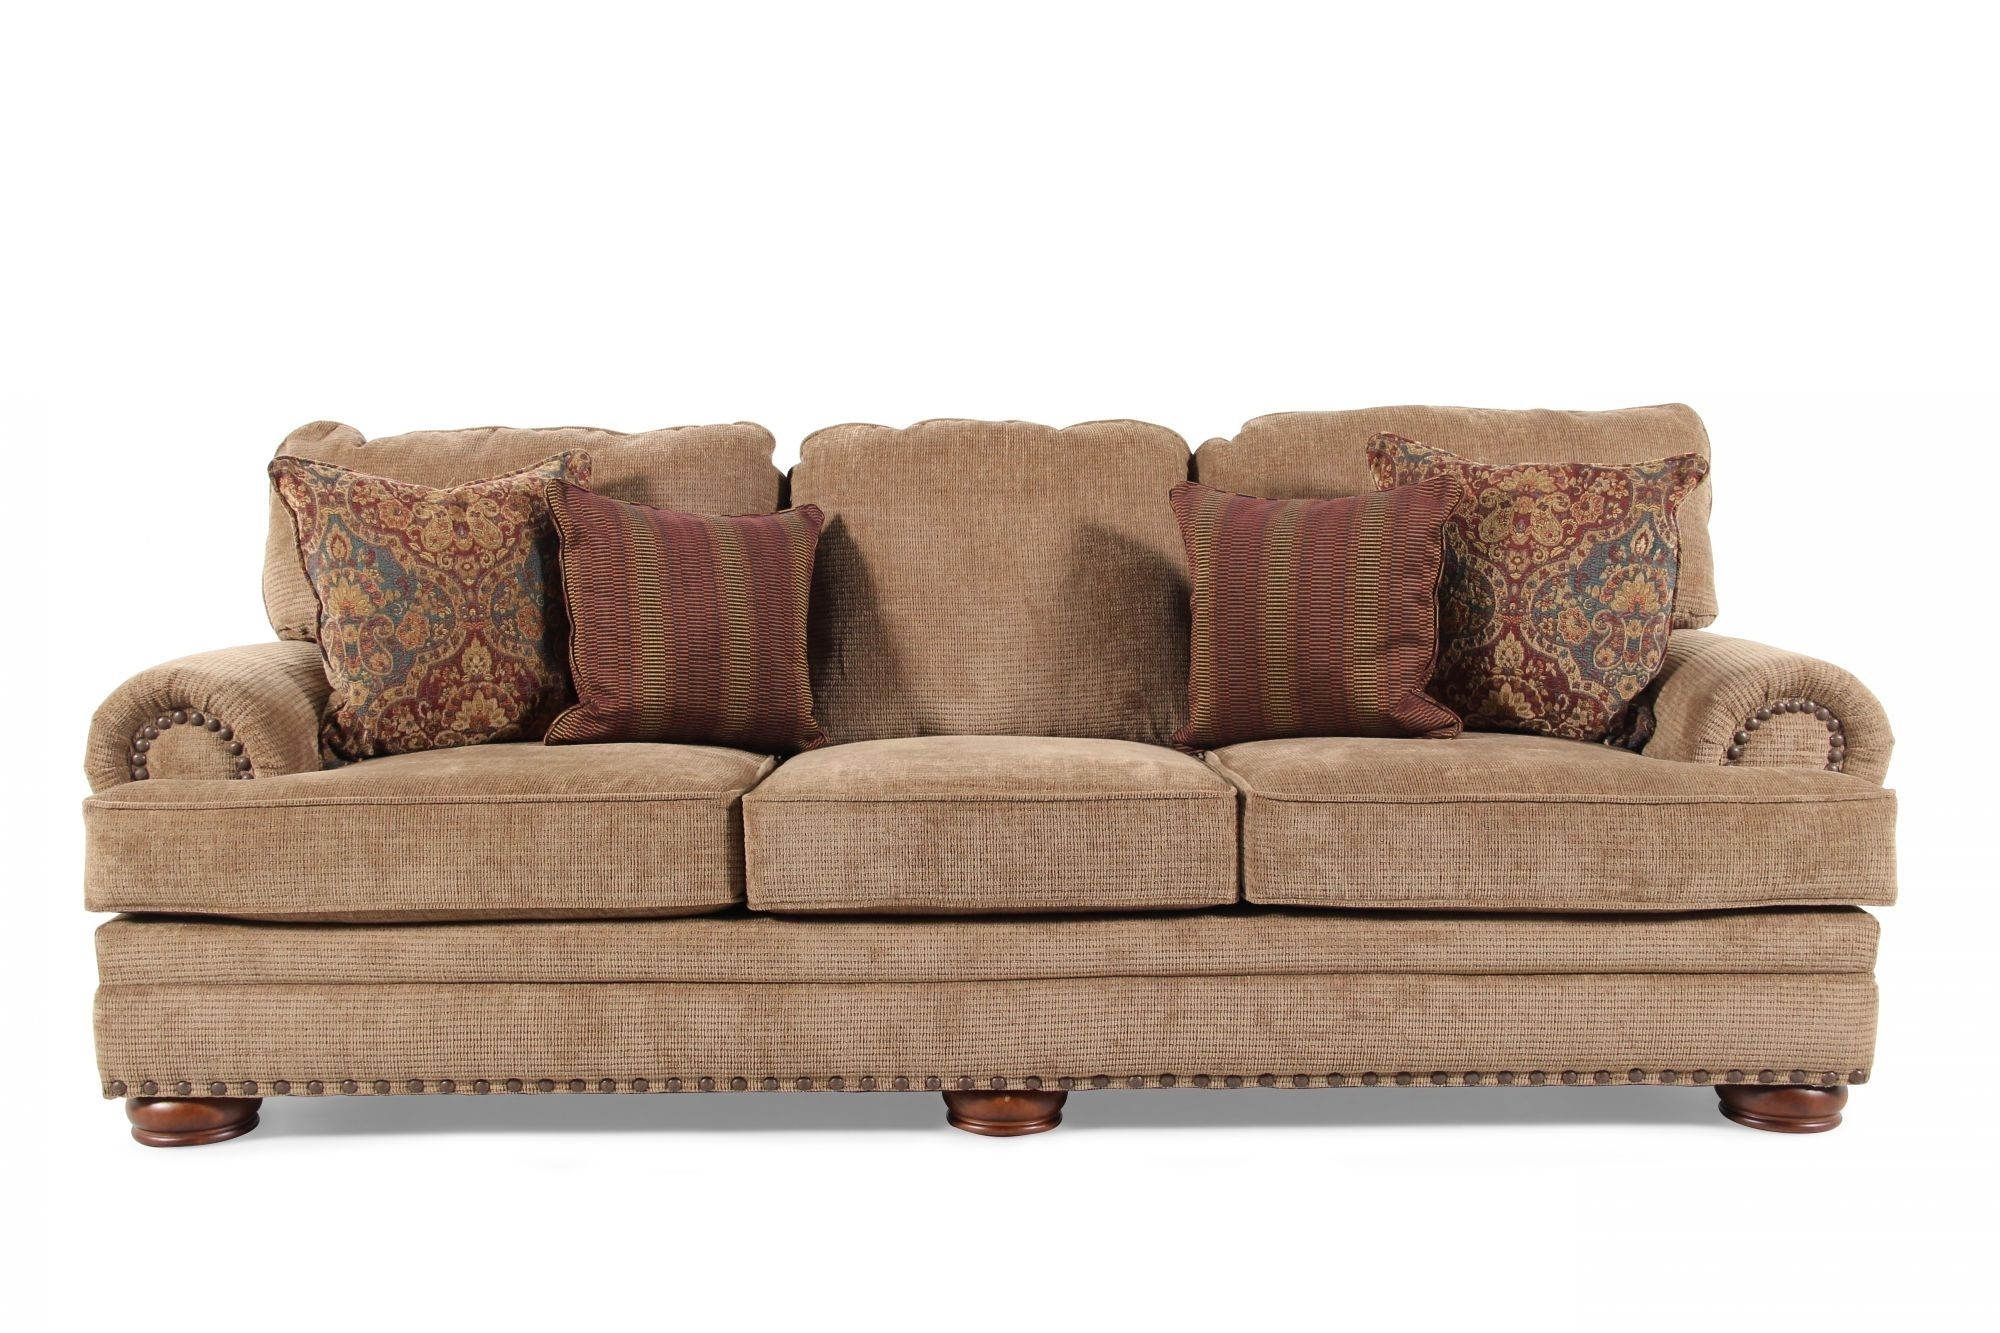 10 Best Collection Of Mathis Brothers Sectional Sofas Sofa Ideas